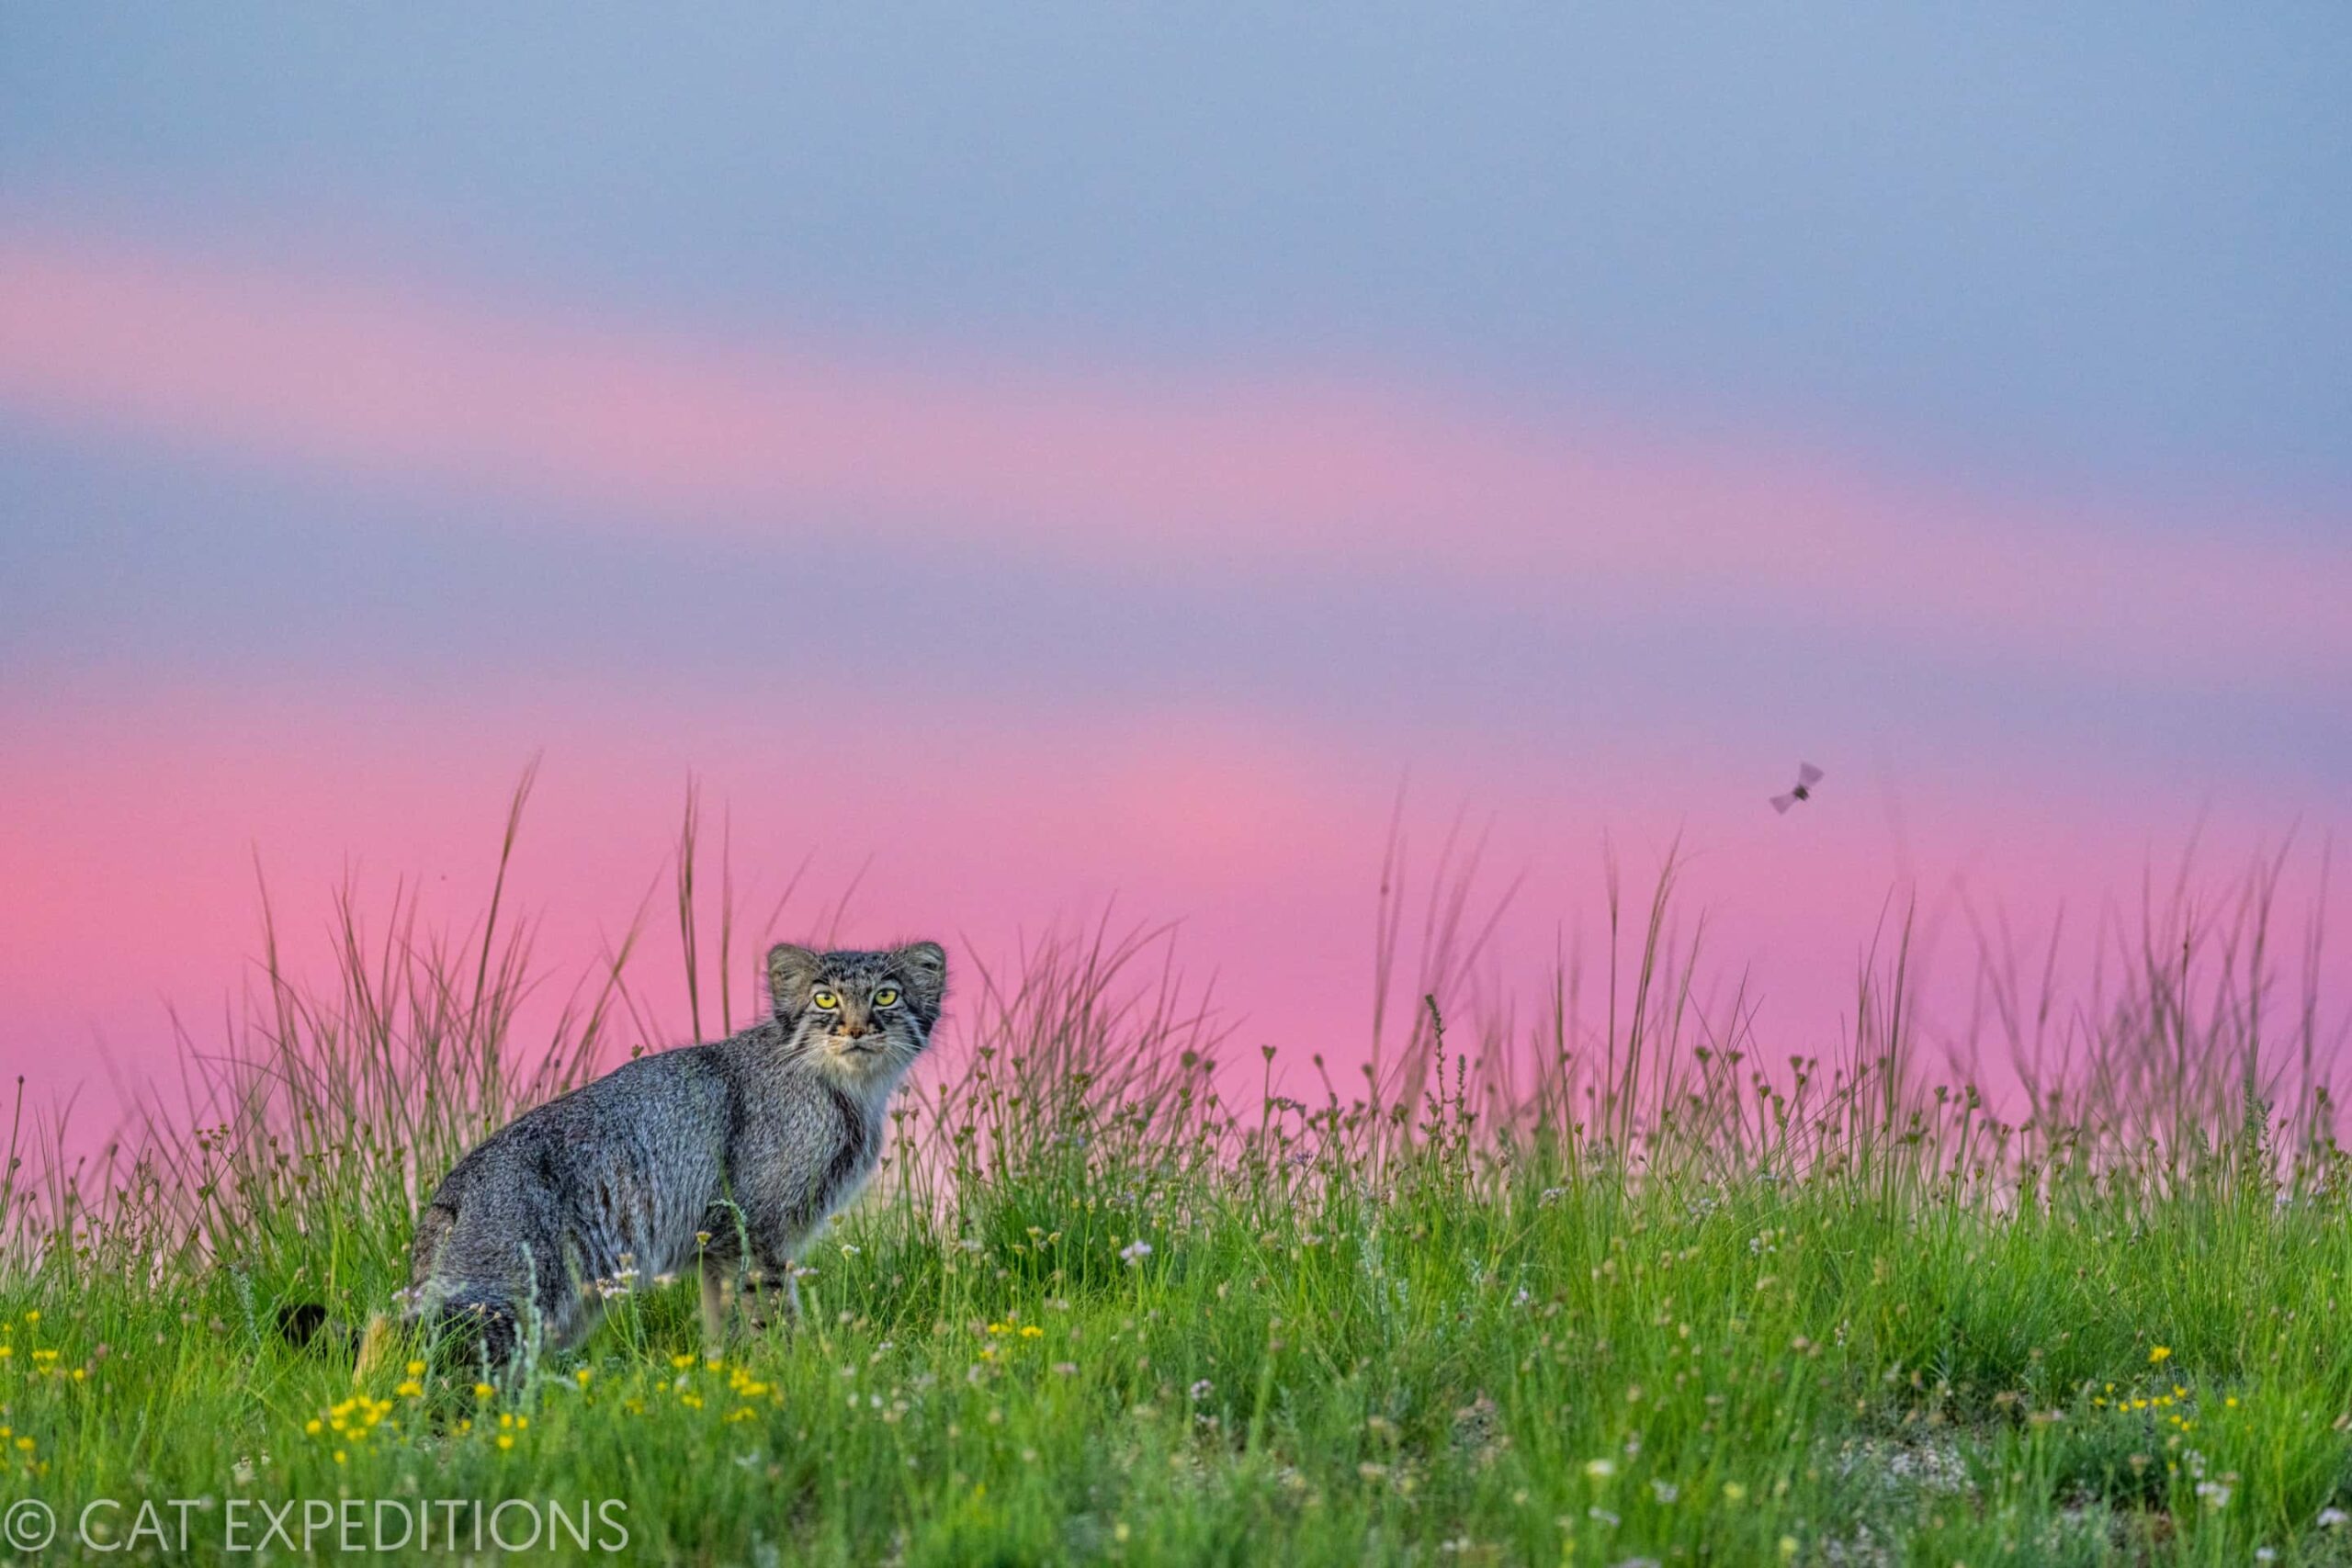 A female manul at sunset. During our manul photo tour we would see mother’s come back
to the den to deliver rodent prey to their young.